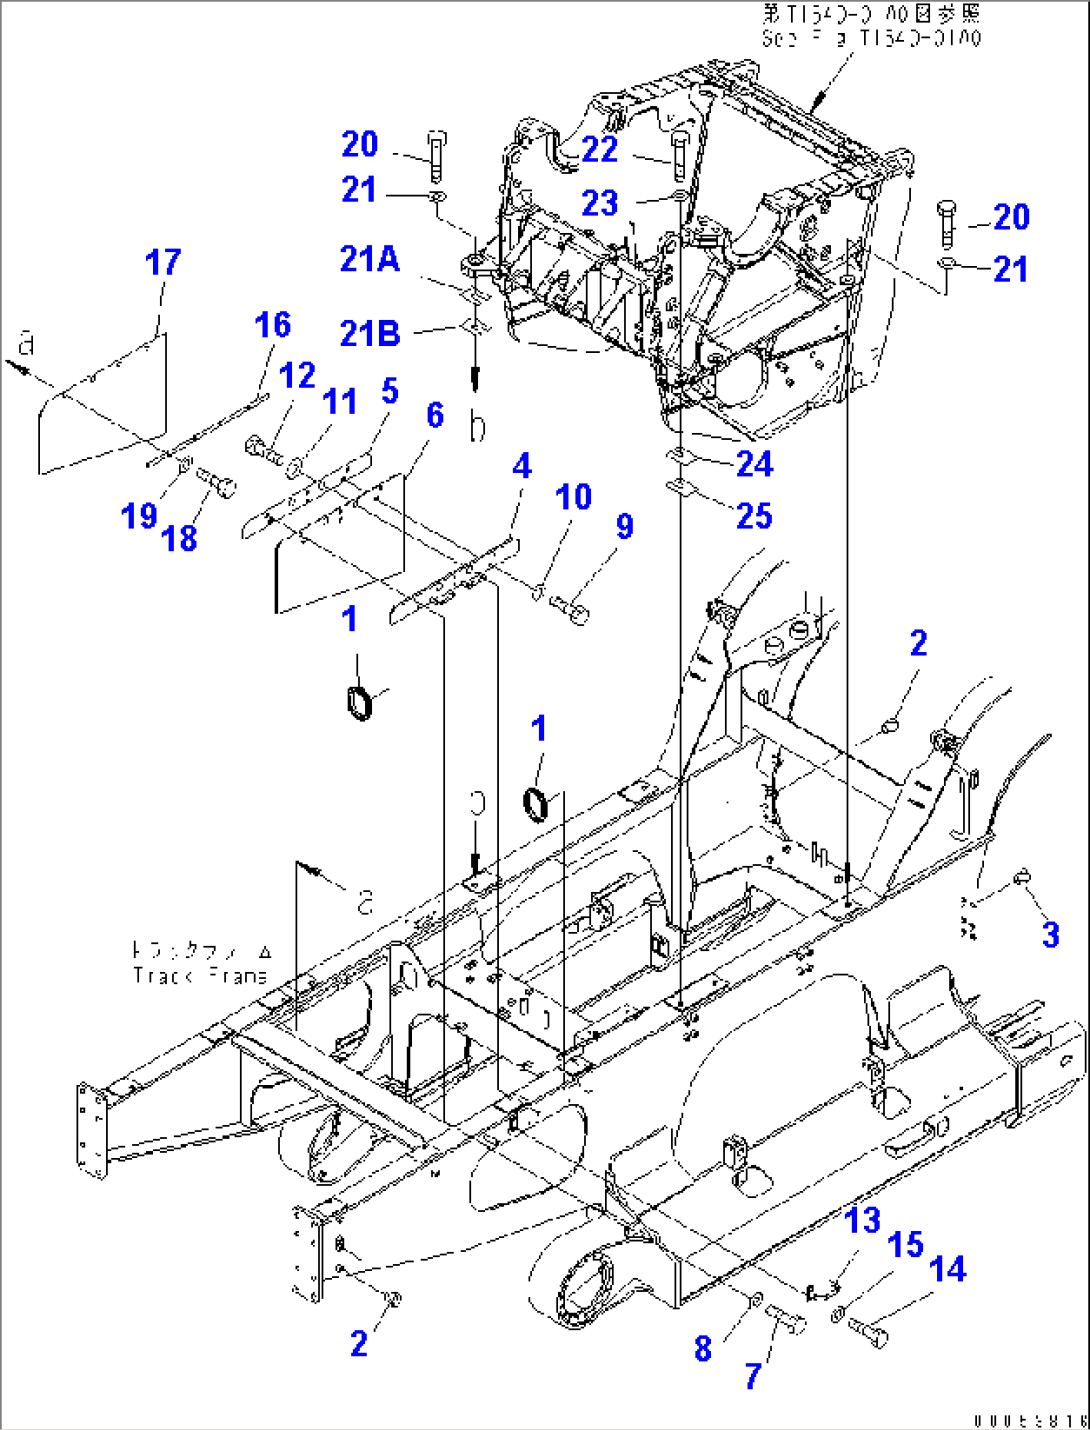 TRACK FRAME (COVER AND CRUSHER MOUNT)(#2001-)